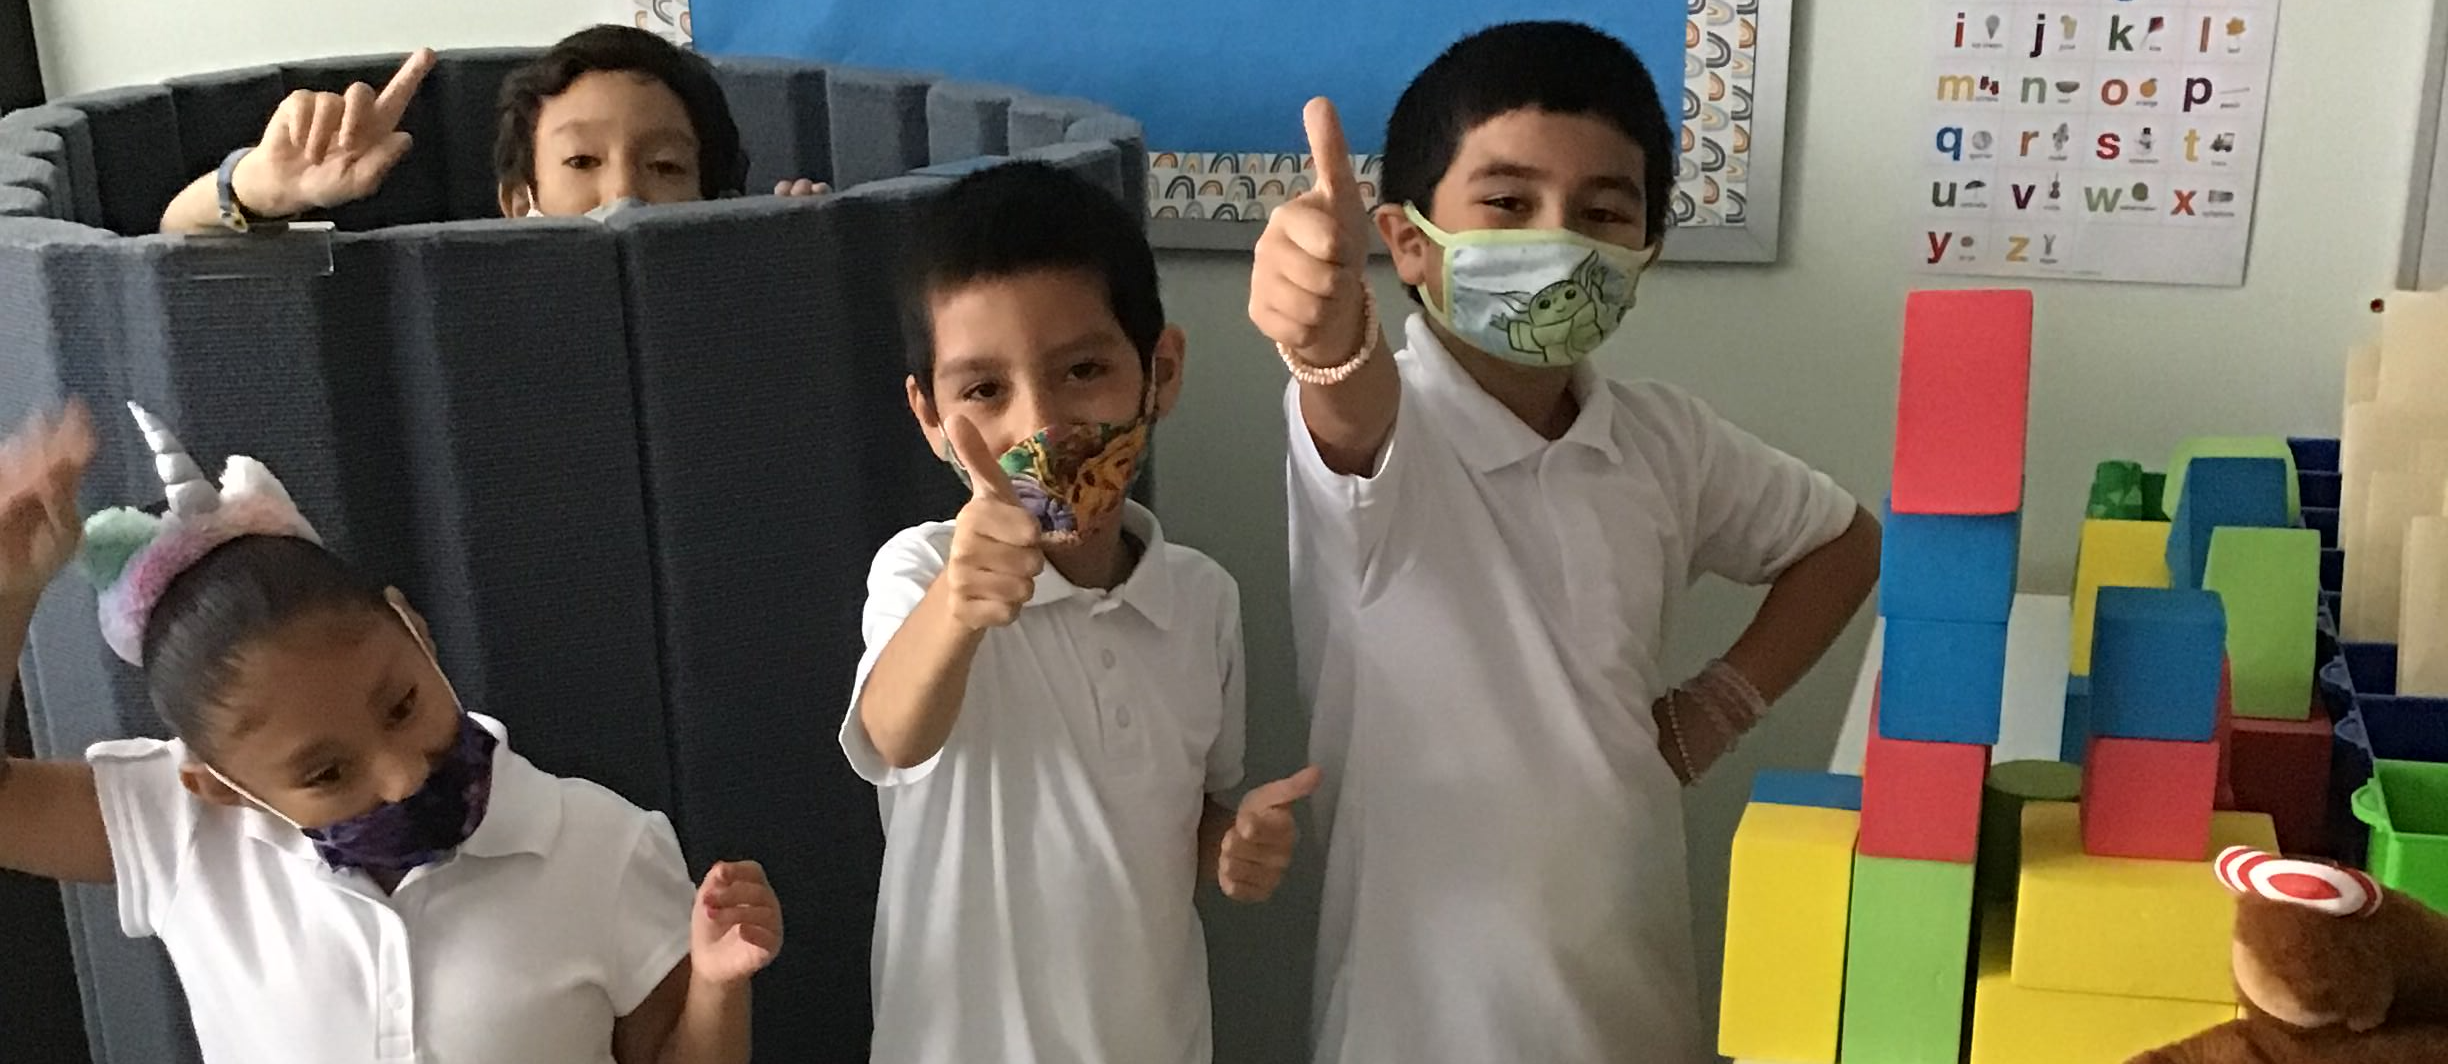 students giving thumbs up